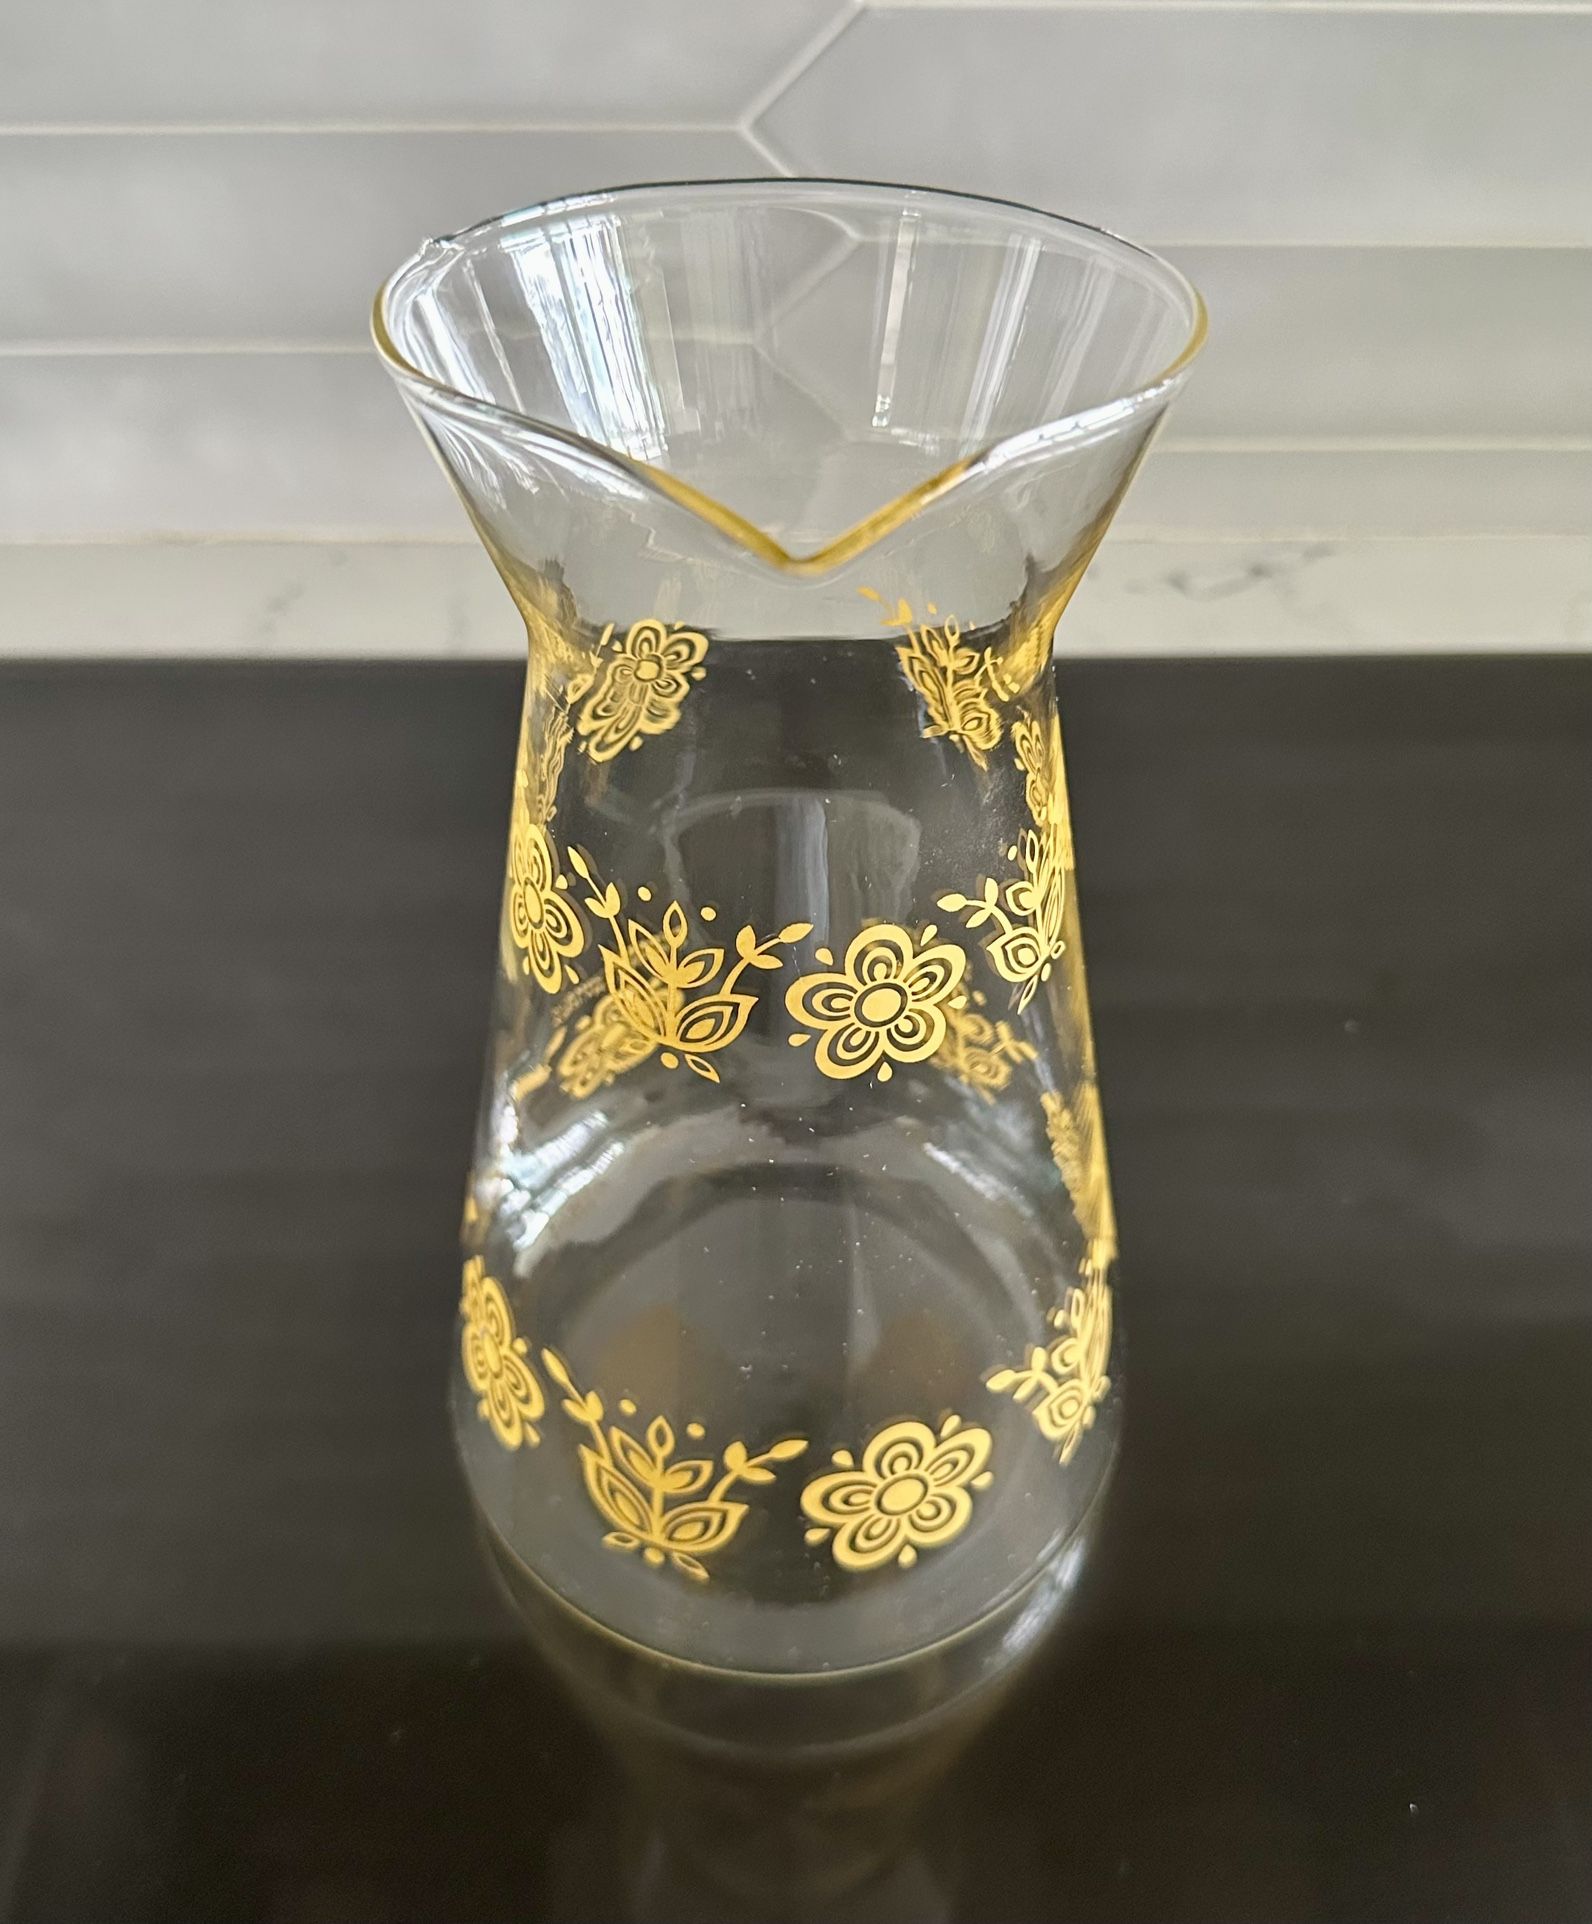 Vintage Pyrex Butterfly Gold Glass  Pitcher/Carafe Jug. Holds 48 Oz. 9 1/2” tall.  No chips or cracks. Glass is clear and shiny.  